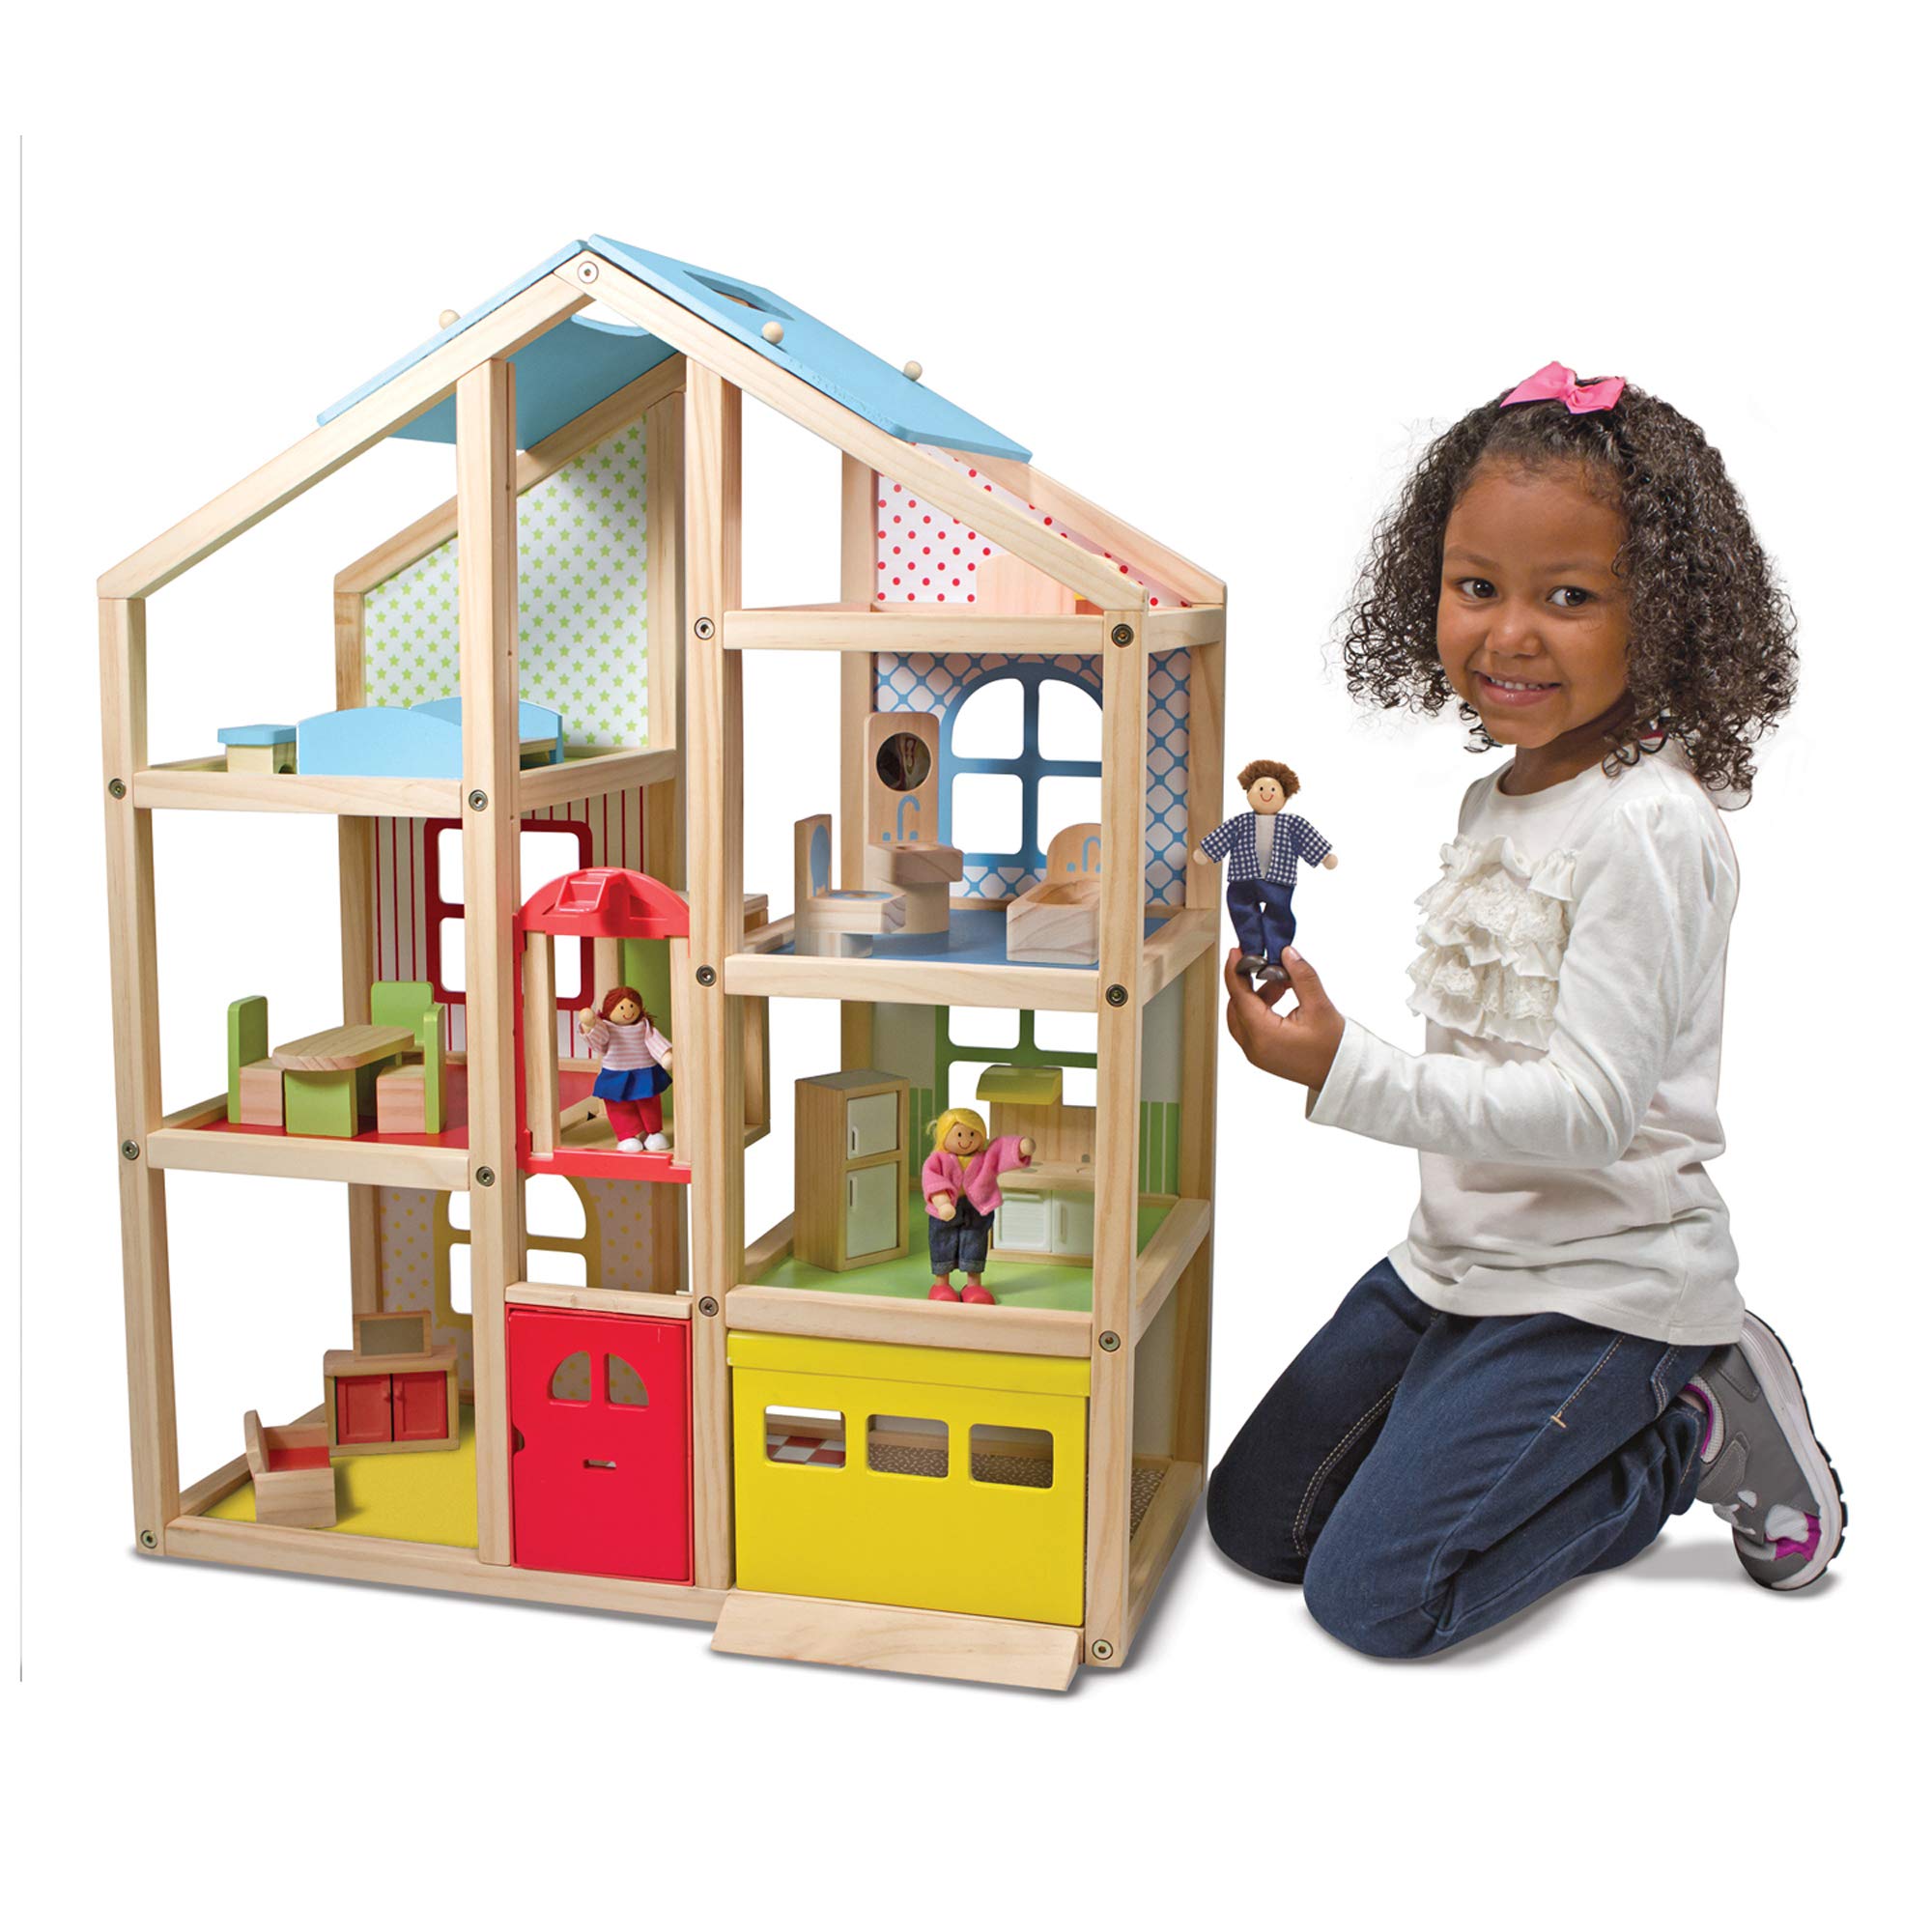 Melissa & Doug Hi-Rise Wooden Dollhouse With 15 pcs Furniture - Garage and Working Elevator